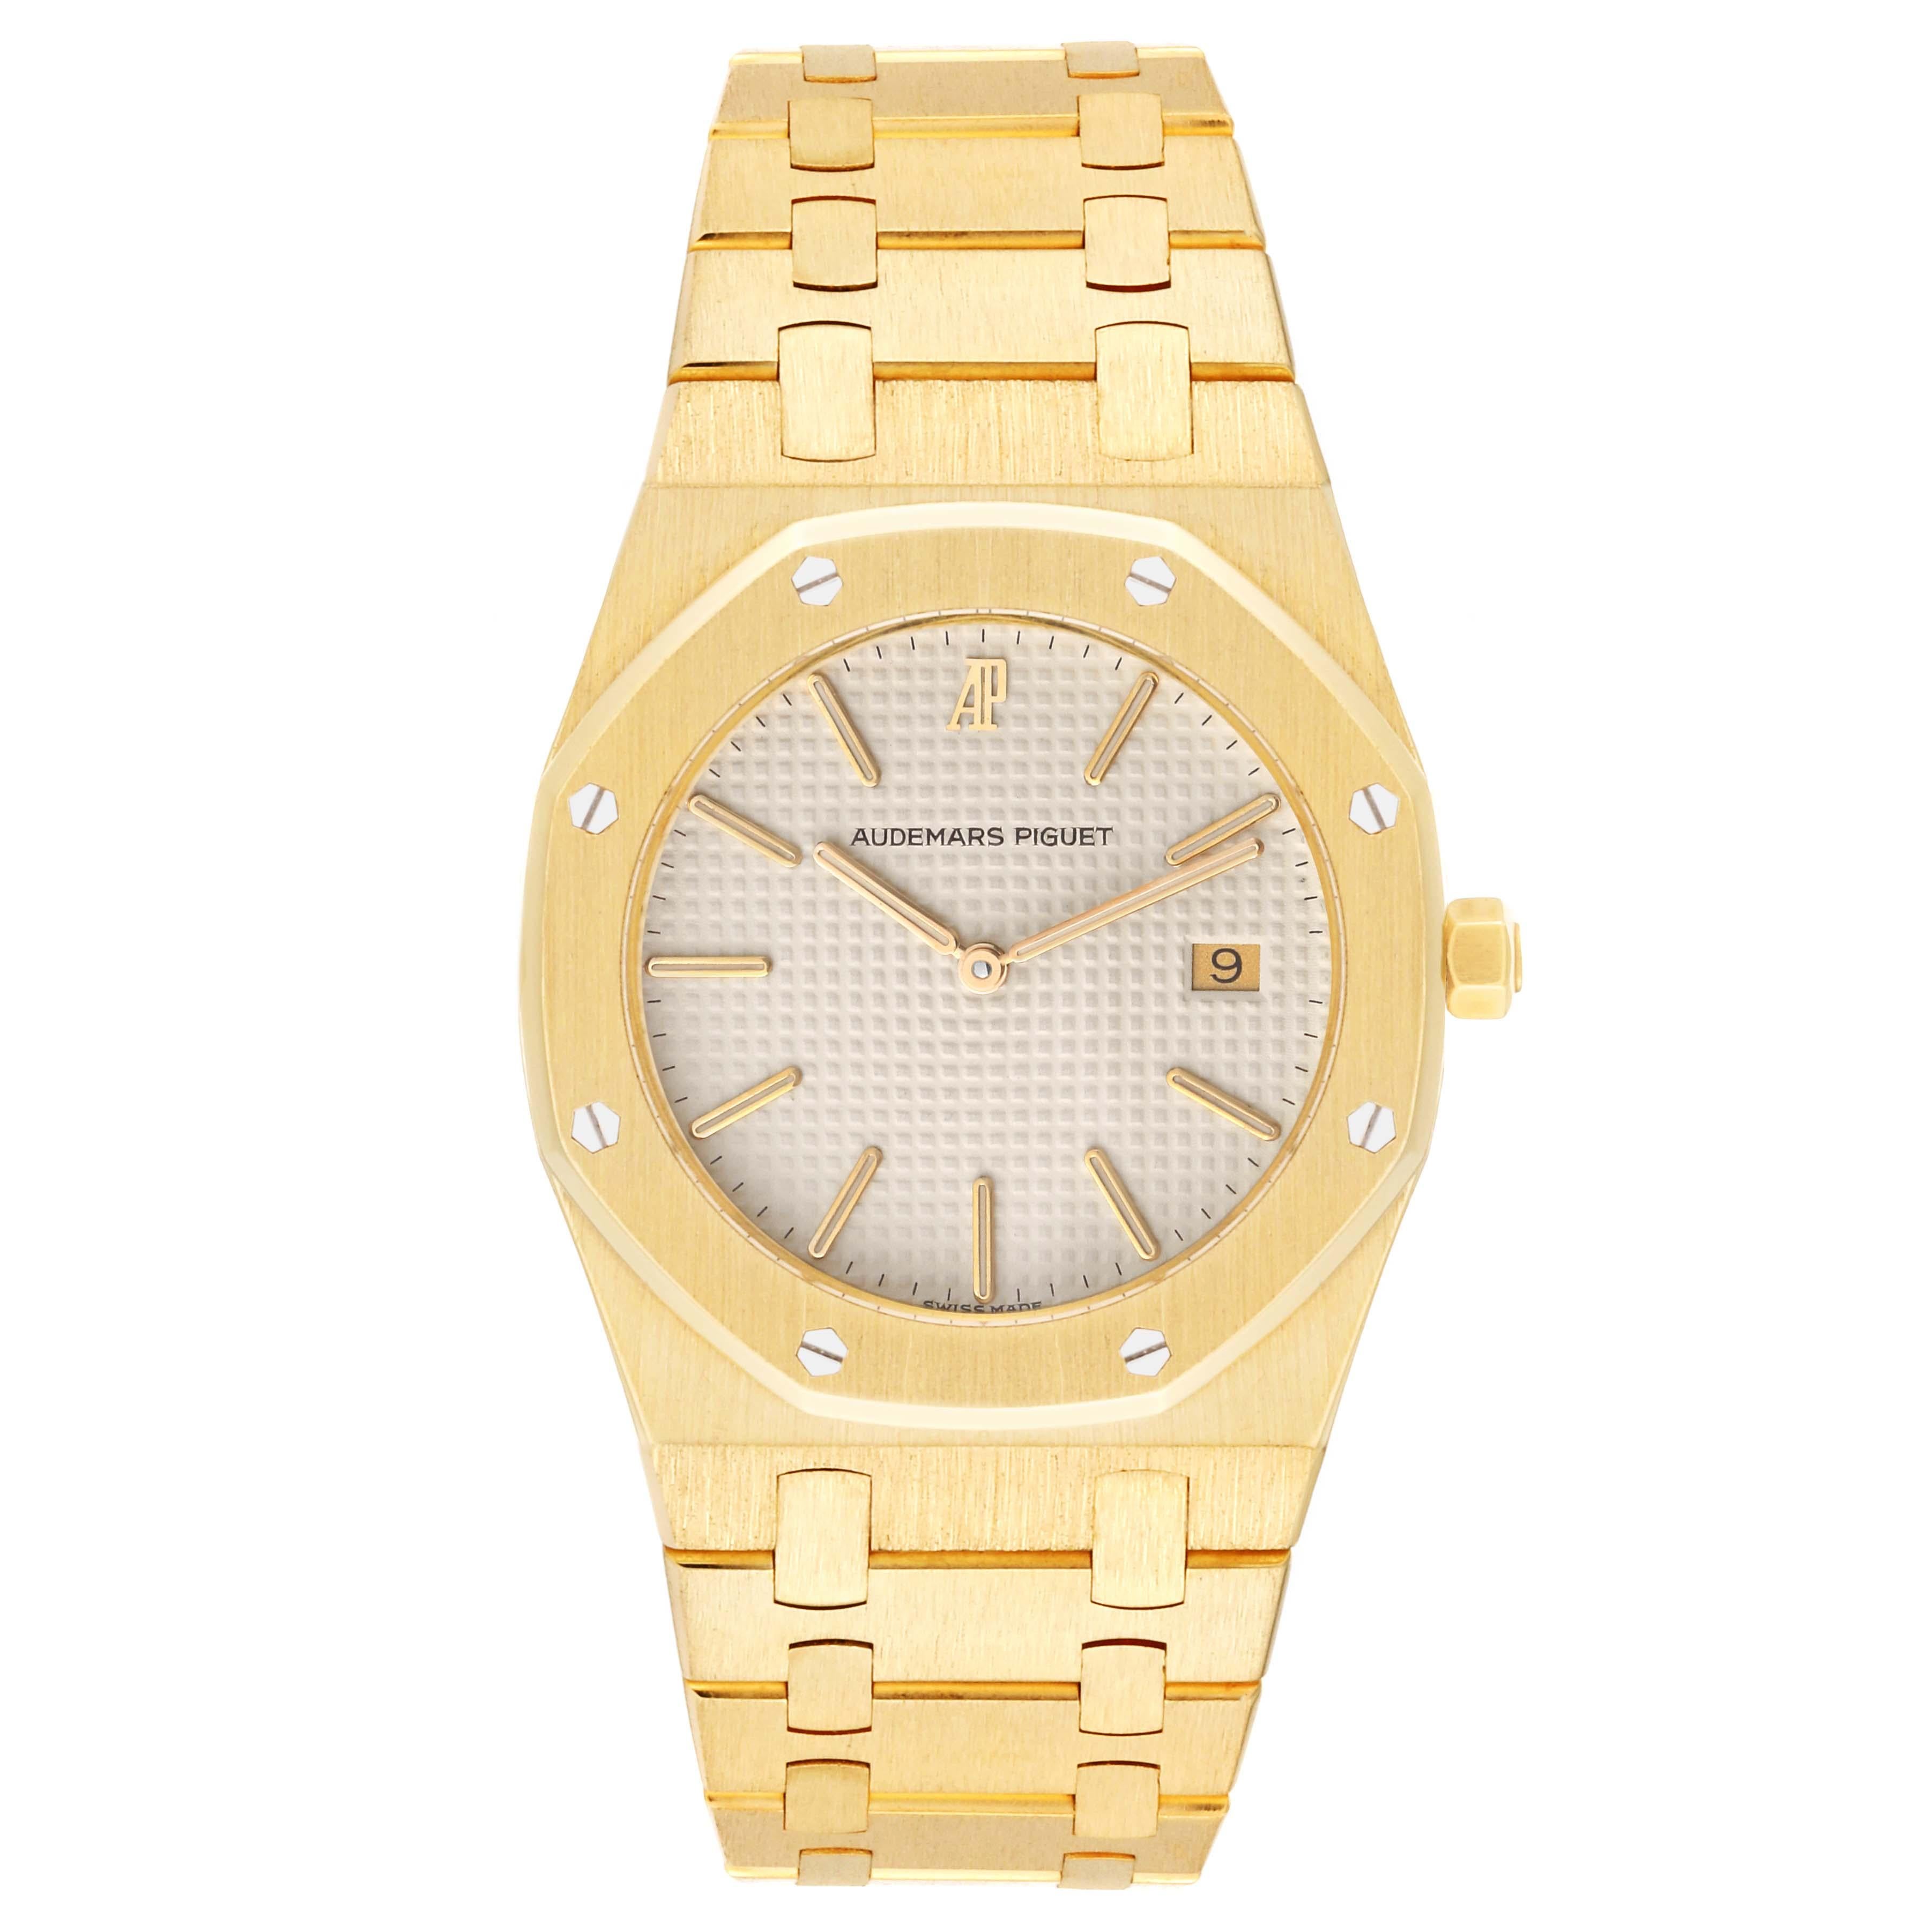 Audemars Piguet Royal Oak Yellow Gold Mens Watch 56175BA. Quartz movement. 18k yellow gold case 33.0 mm in diameter. 18k yellow gold bezel punctuated with 8 signature screws. Scratch resistant sapphire crystal. Ivory Tapisserie (waffle pattern) dial